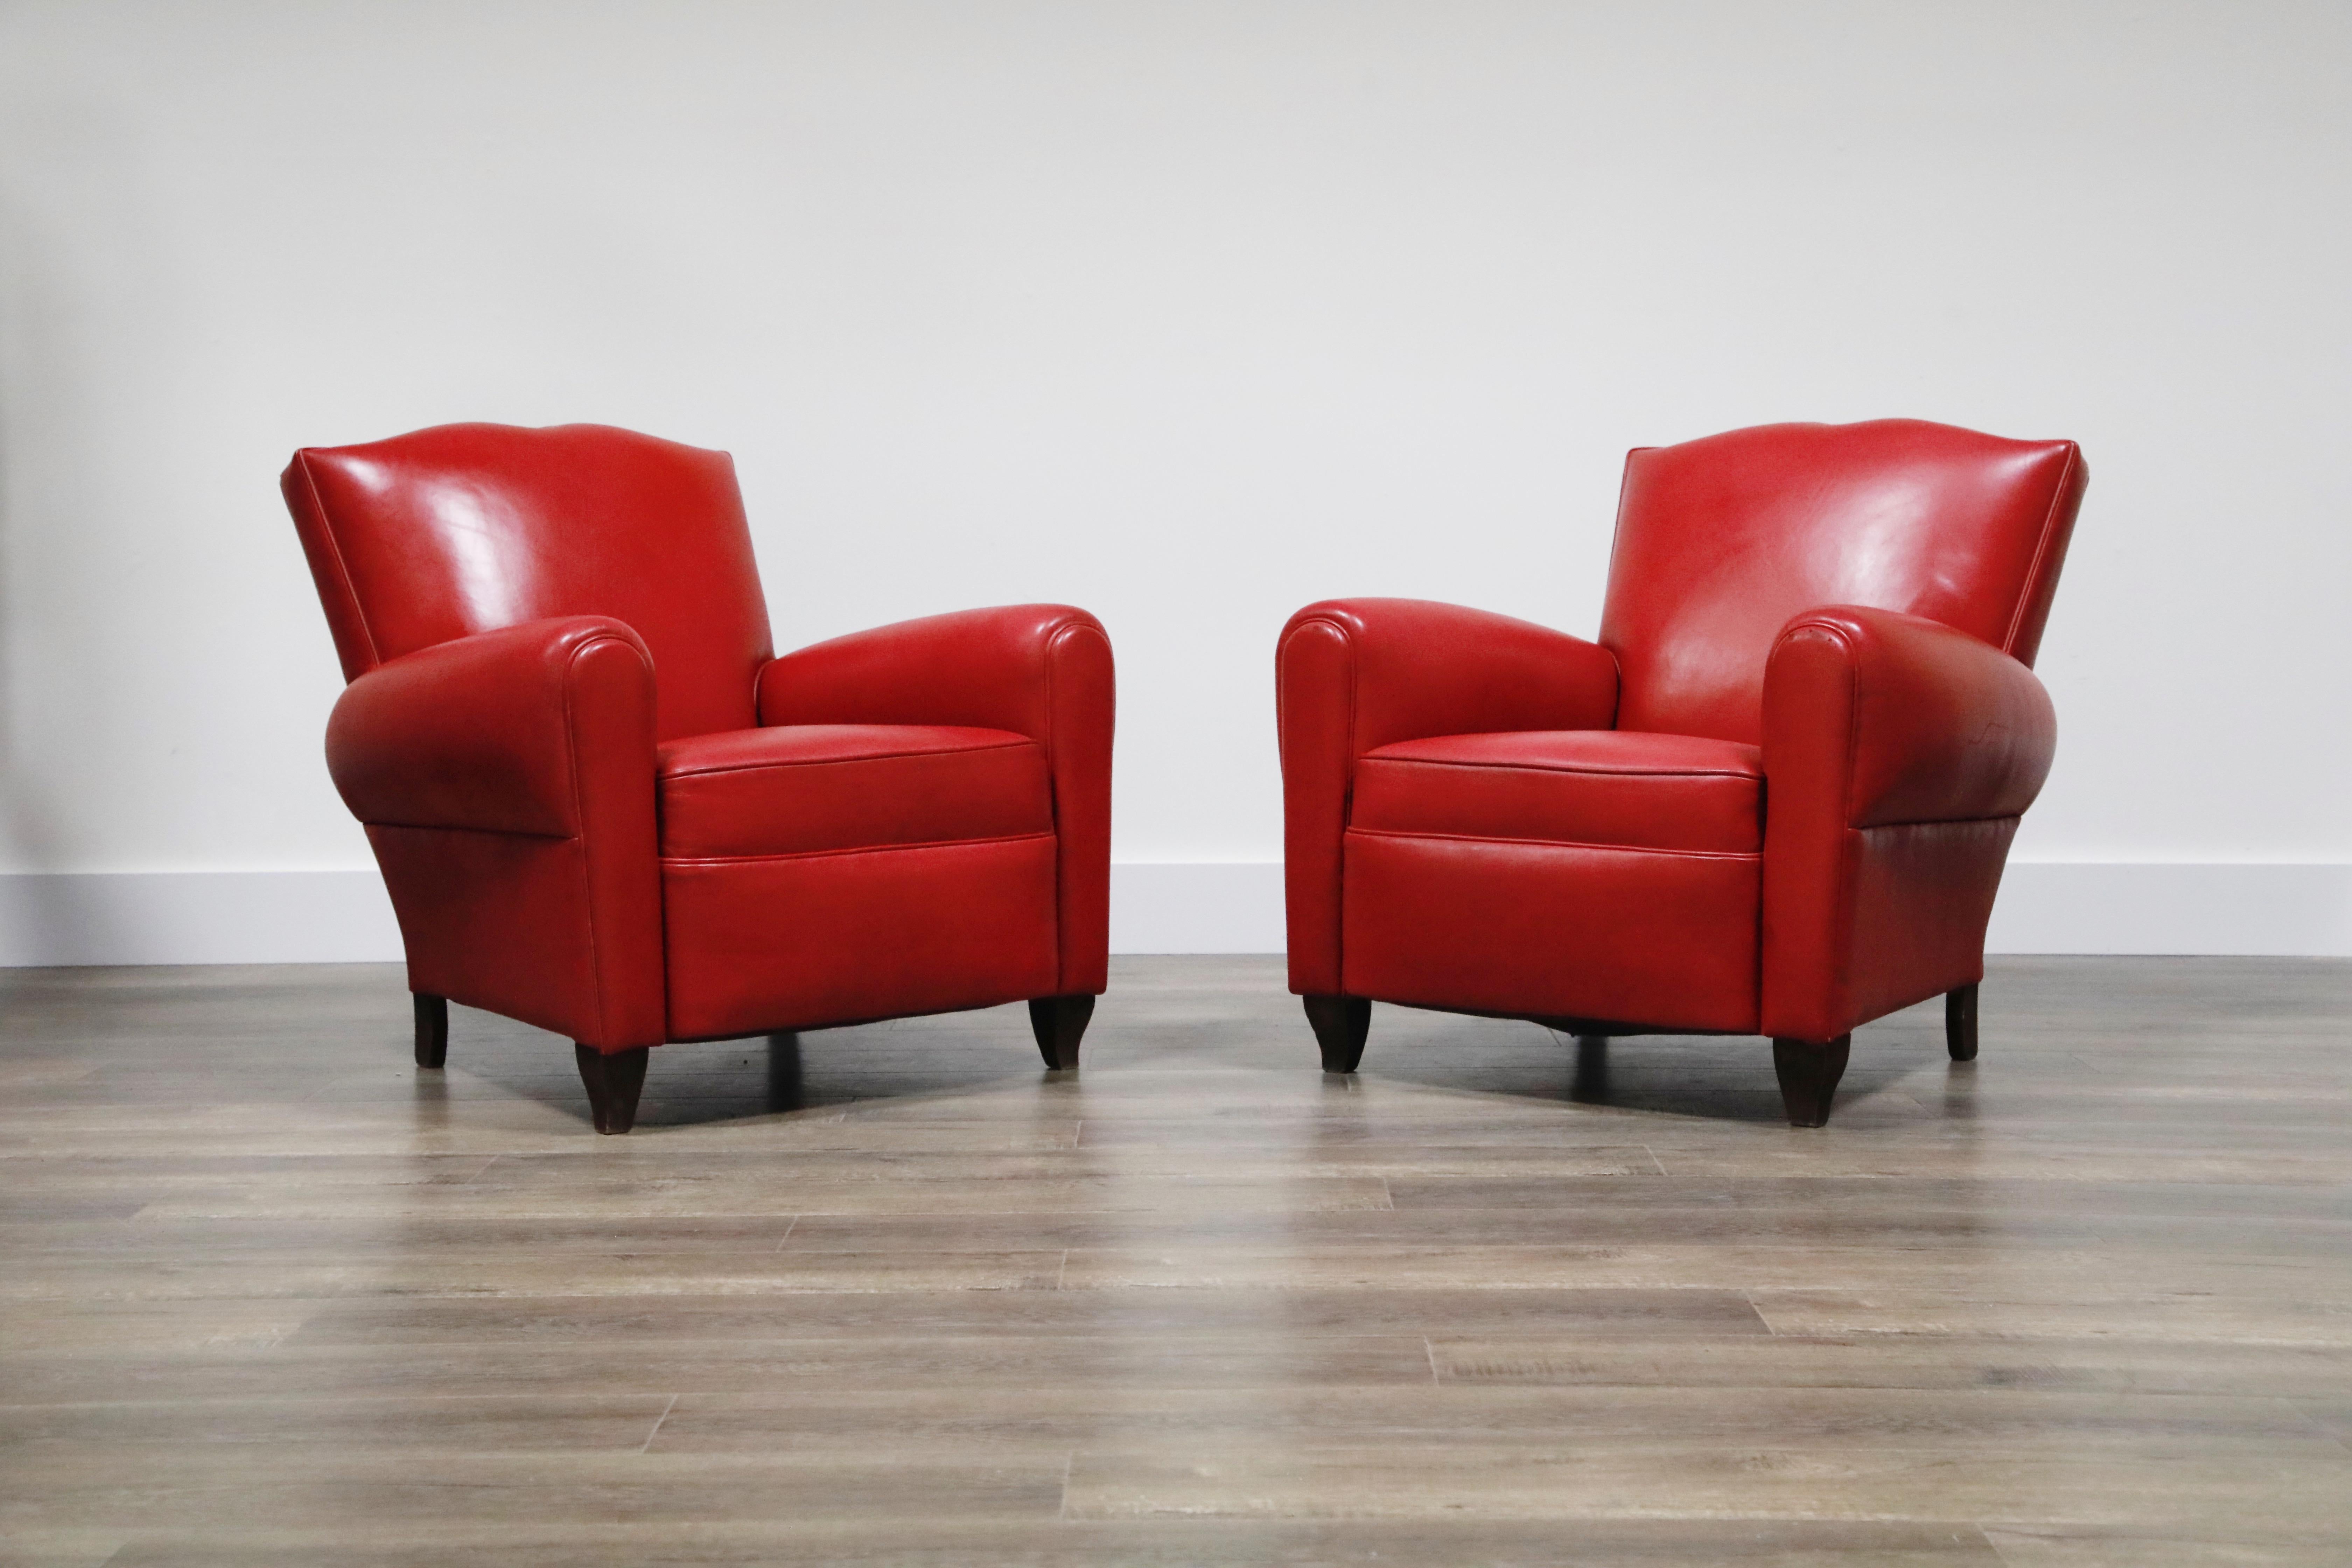 This Classic pair of Art Deco moustache club chairs were recently restored in a beautiful red leather and used in a light showroom setting with very light wear and light patina. In this deep red leather the shape also mimics lips with red lipstick.